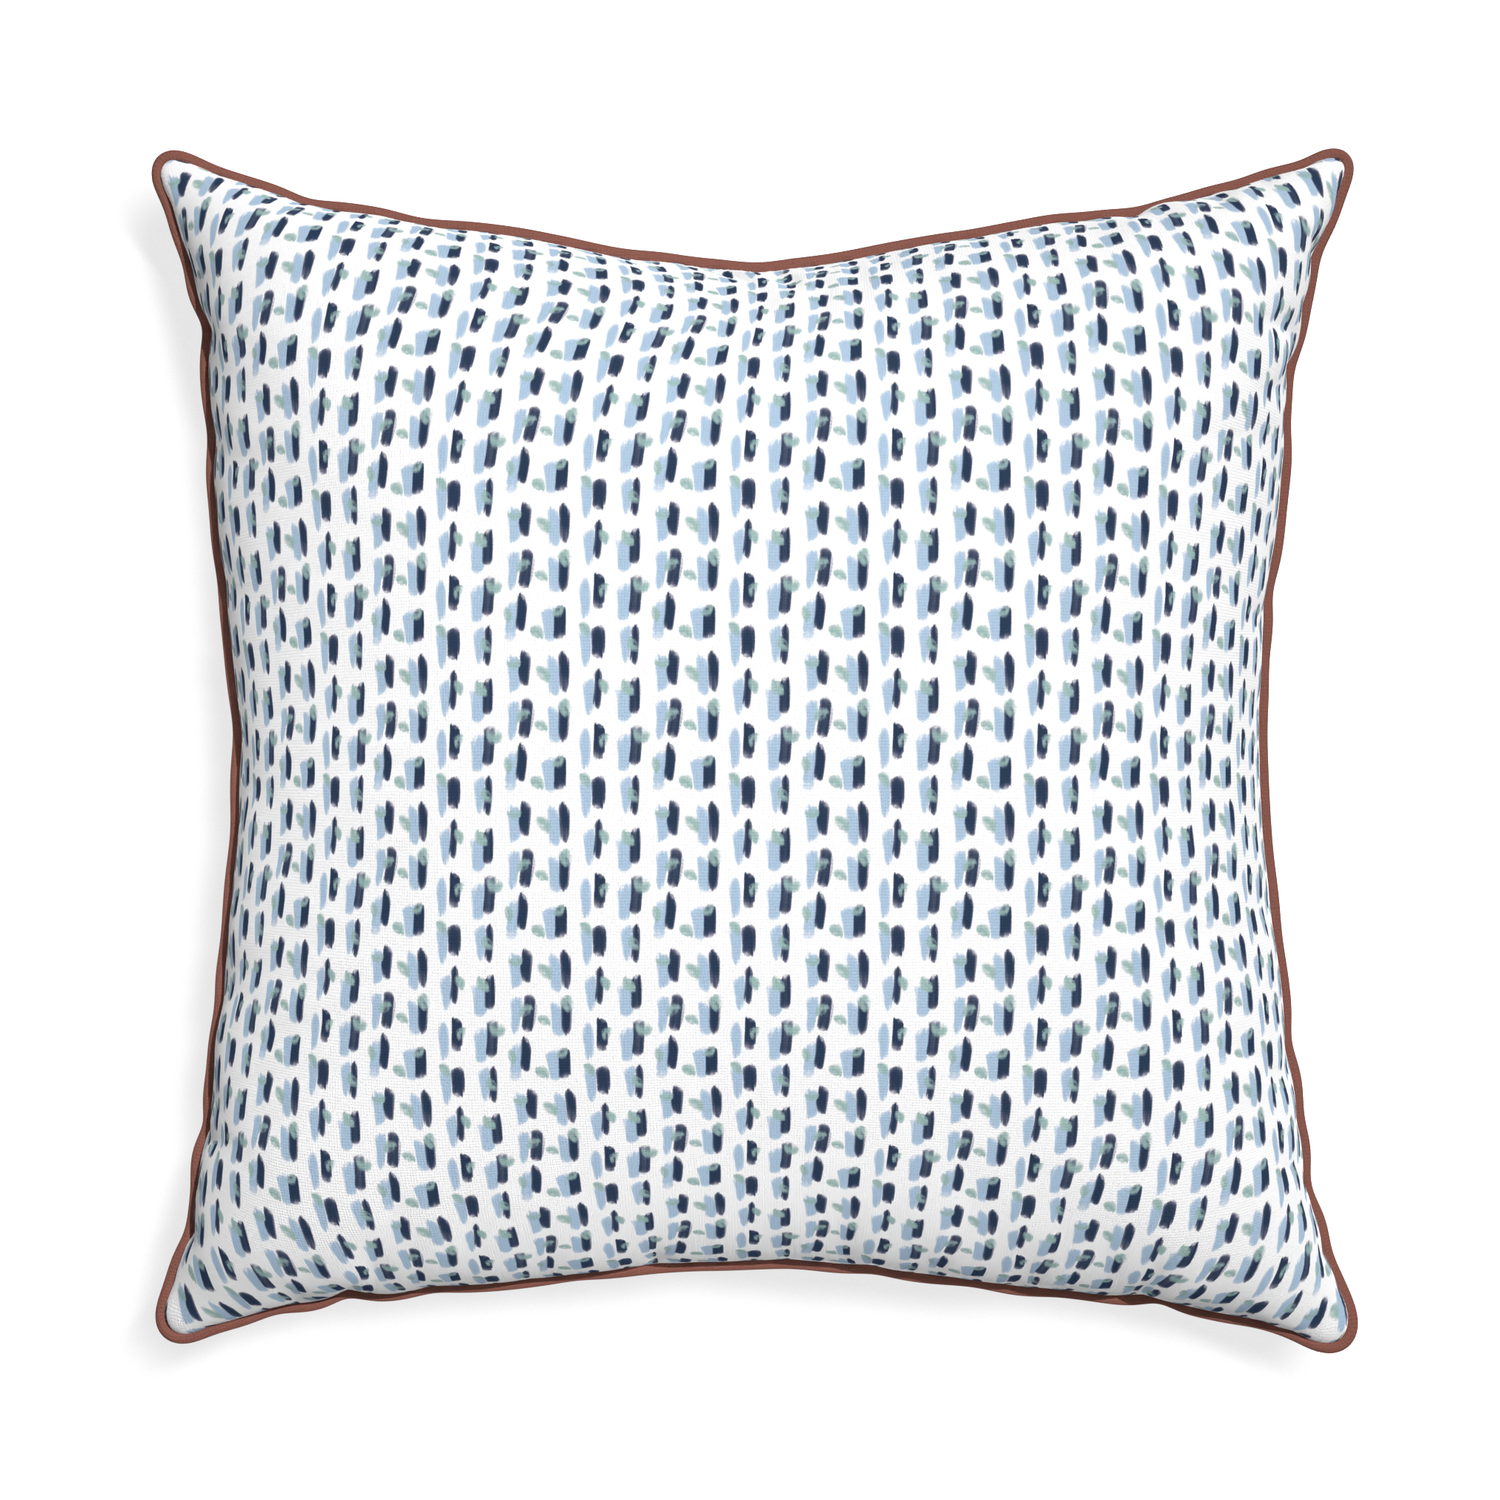 Euro-sham poppy blue custom pillow with w piping on white background